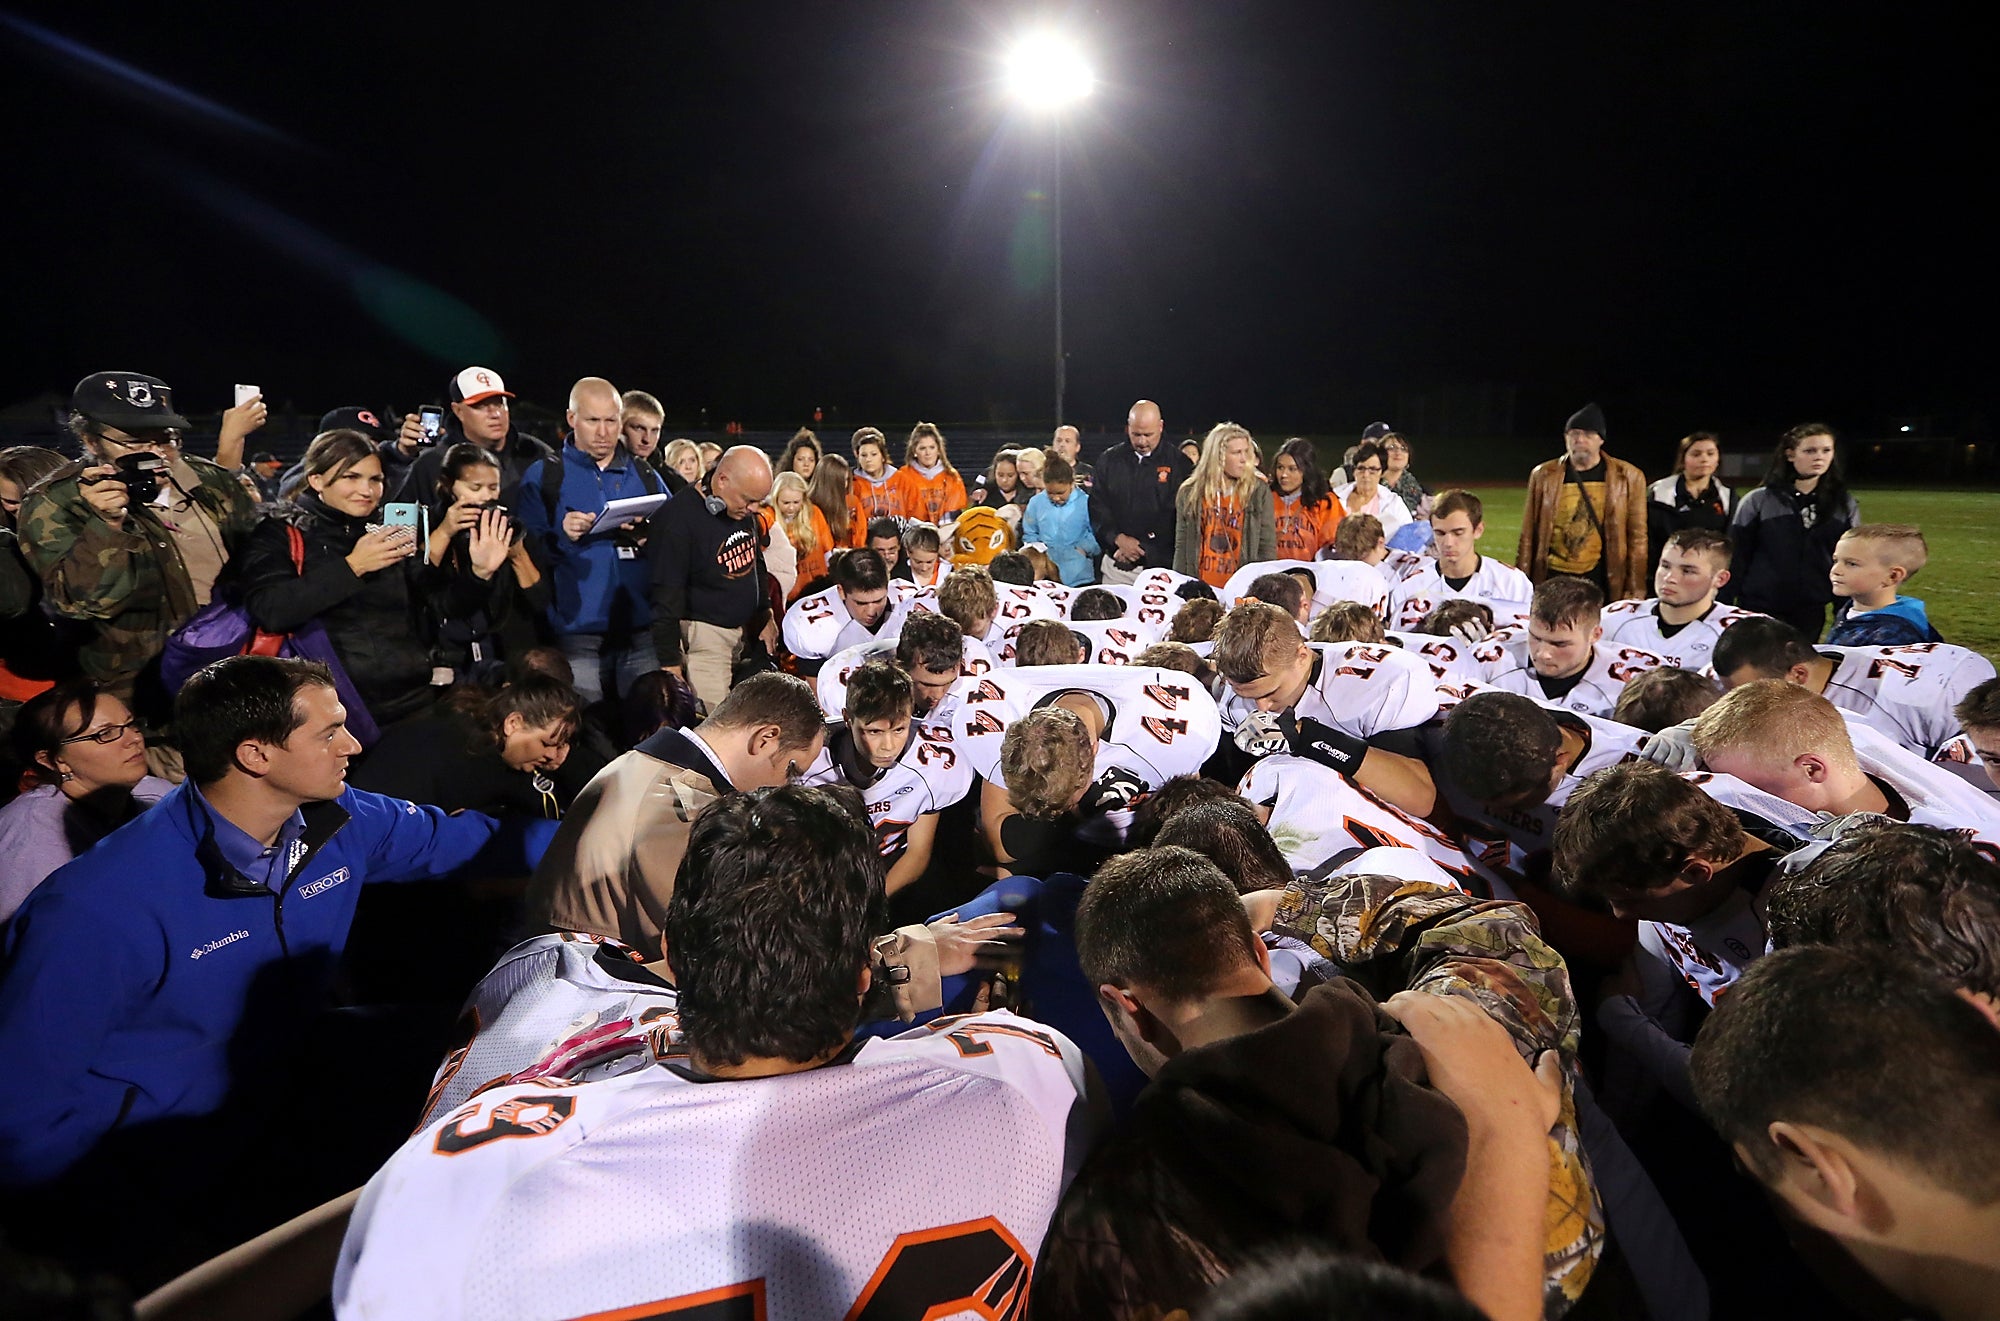 Assistant football coach Joseph Kennedy is surrounded by football players as they kneel and pray with him on the field after their game in 2015